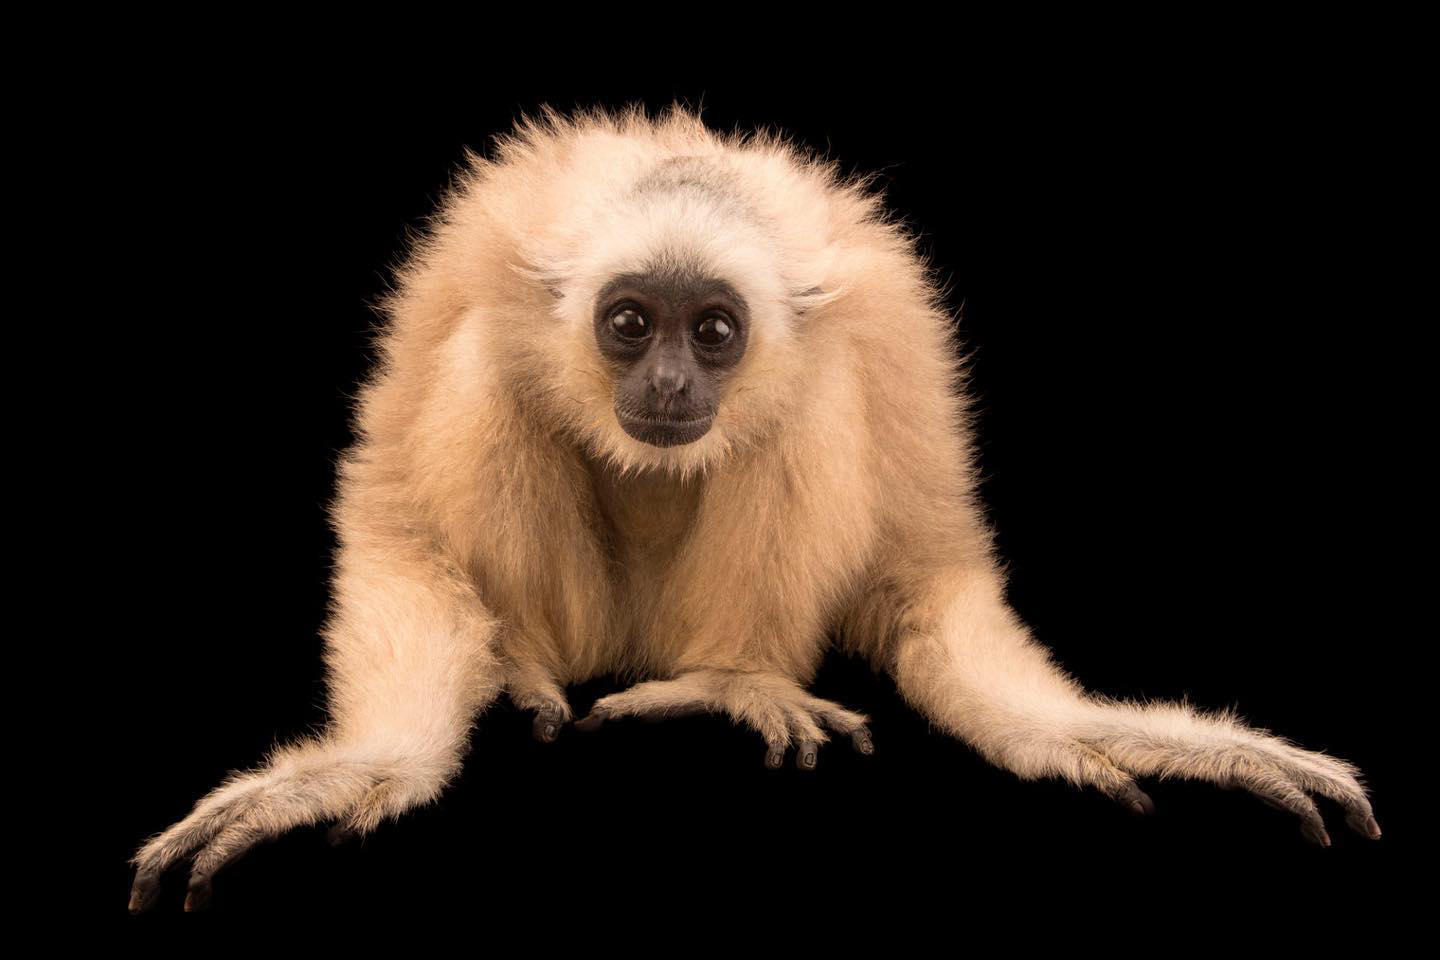 image  1 Joel Sartore- Photo Ark - Pileated gibbons like this two-year-old #accb_cambodia are master brachiat